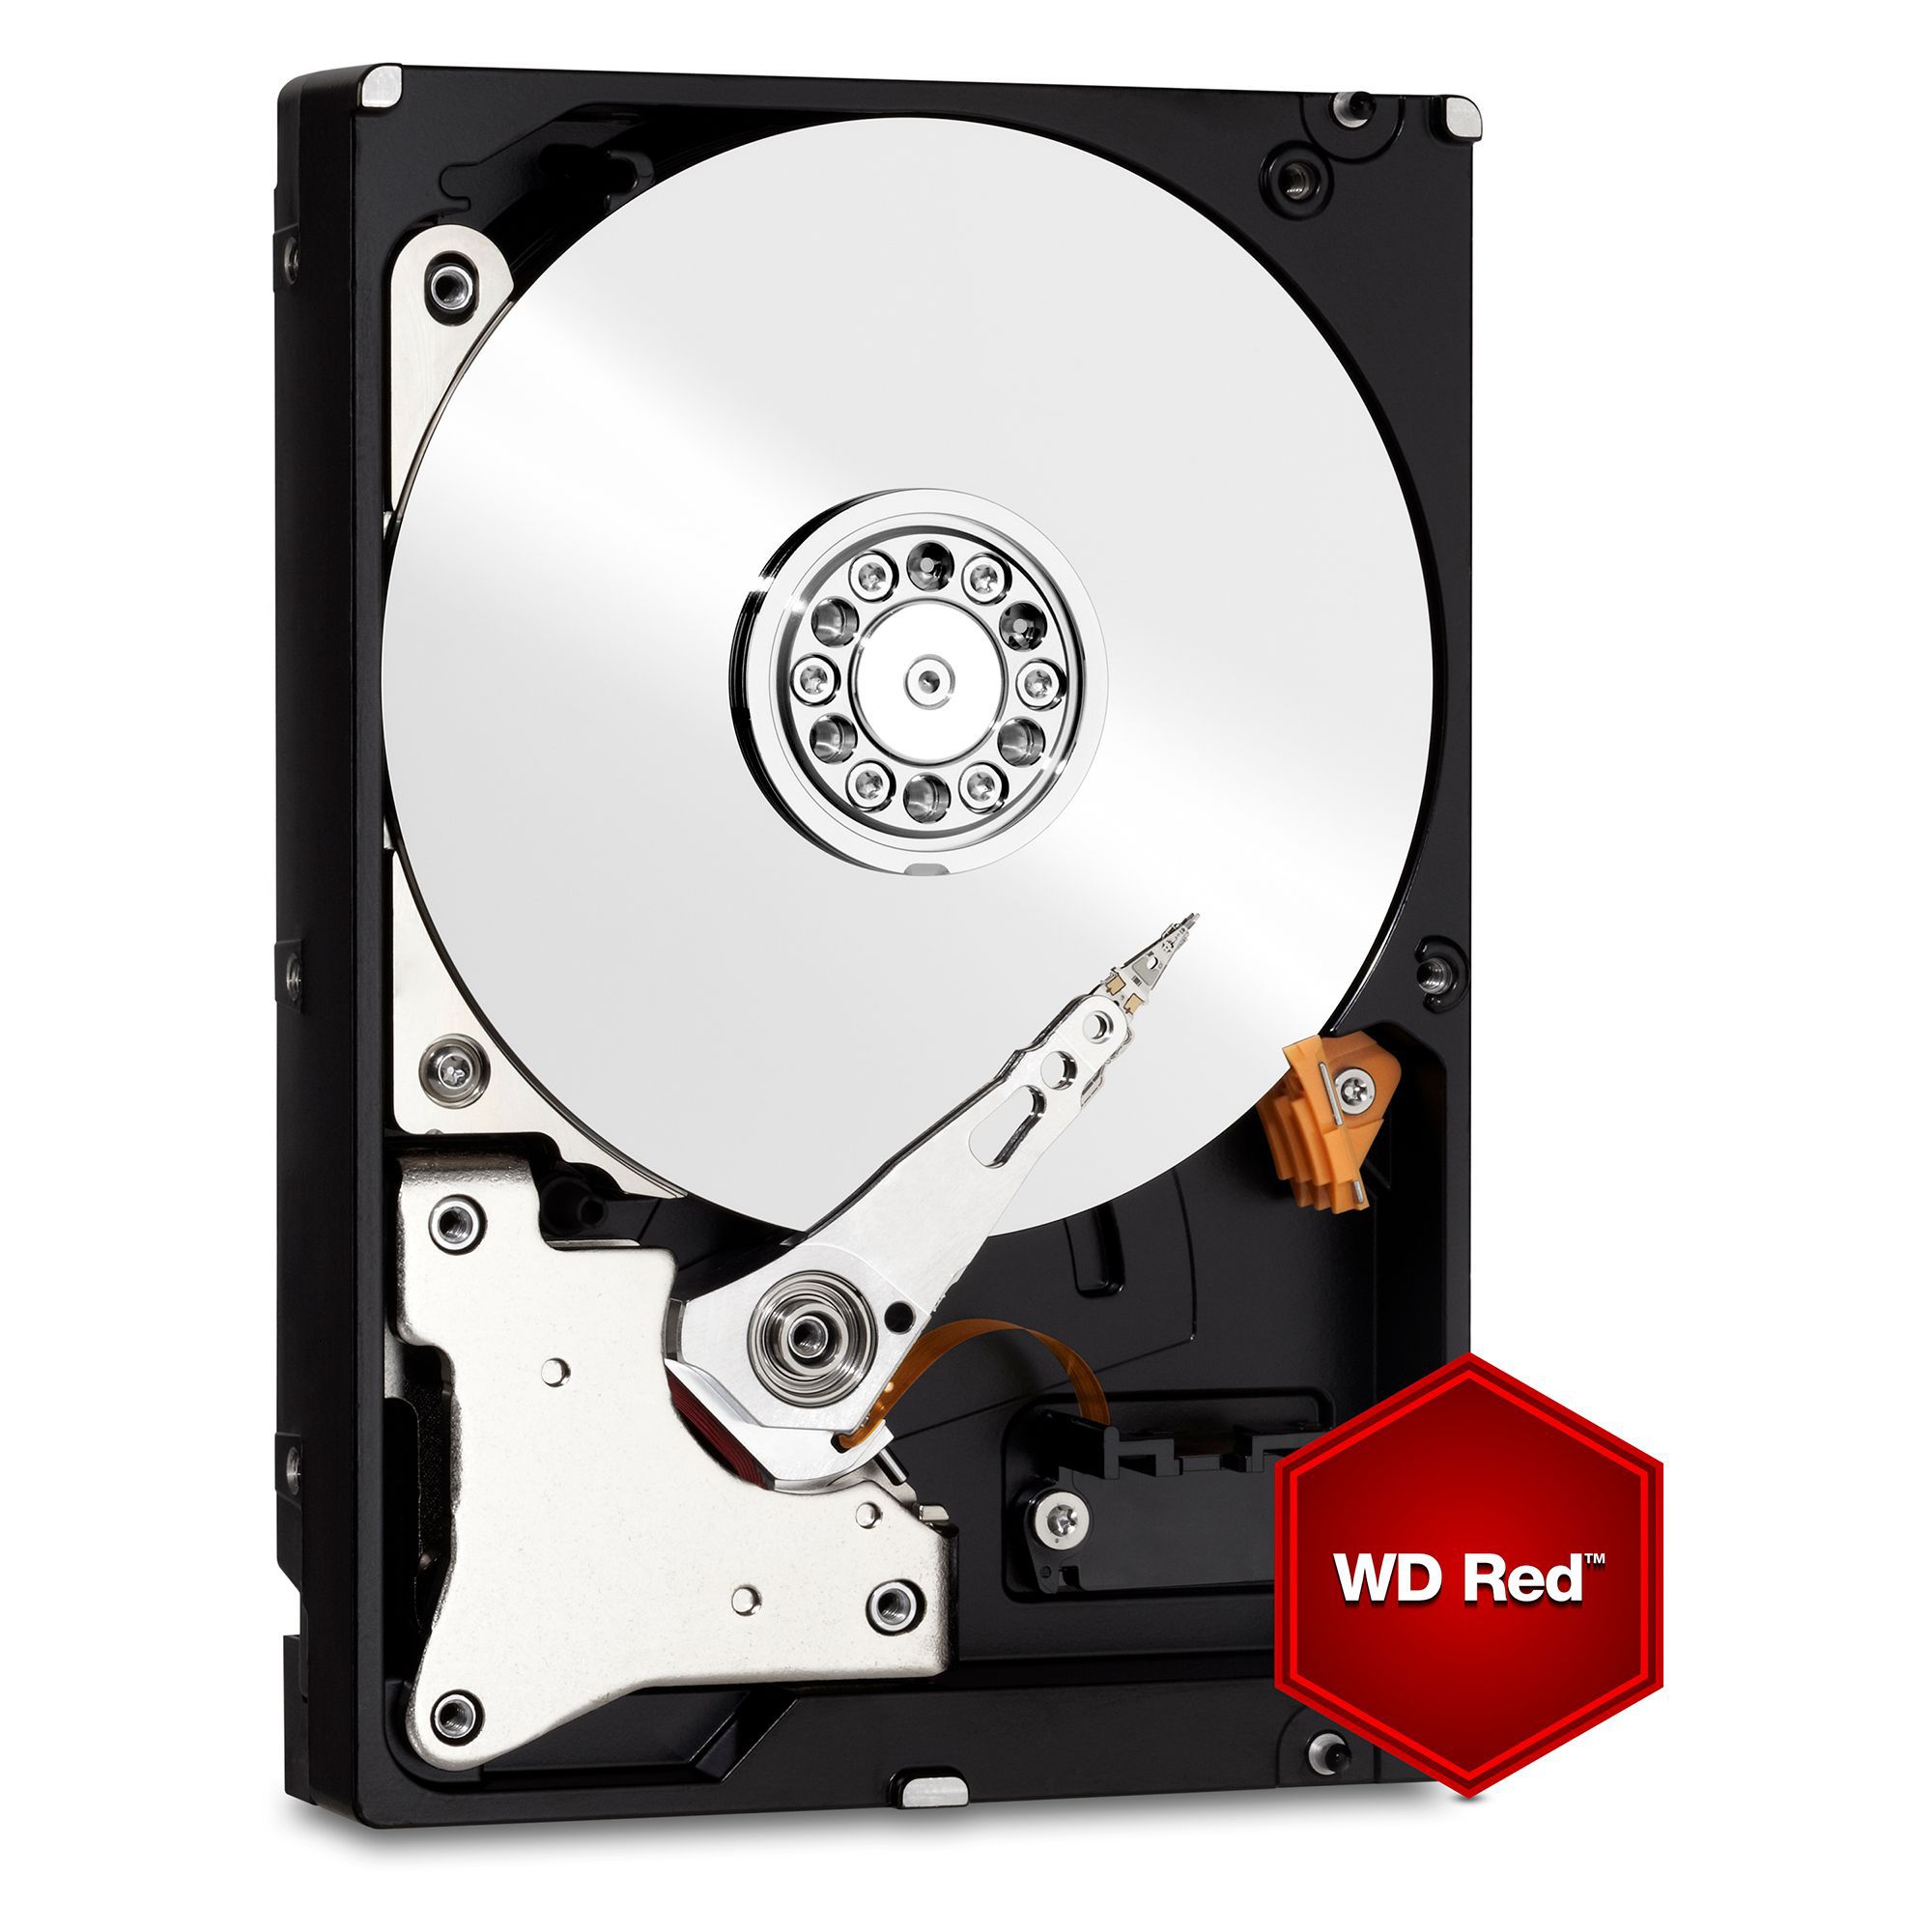 WD Red Plus 1TB SATA 6Gb/s 2.5inch 16MB Cache IntelliPower Internal 24x7 optimized for SOHO NAS systems NASware HDD Bulk_2